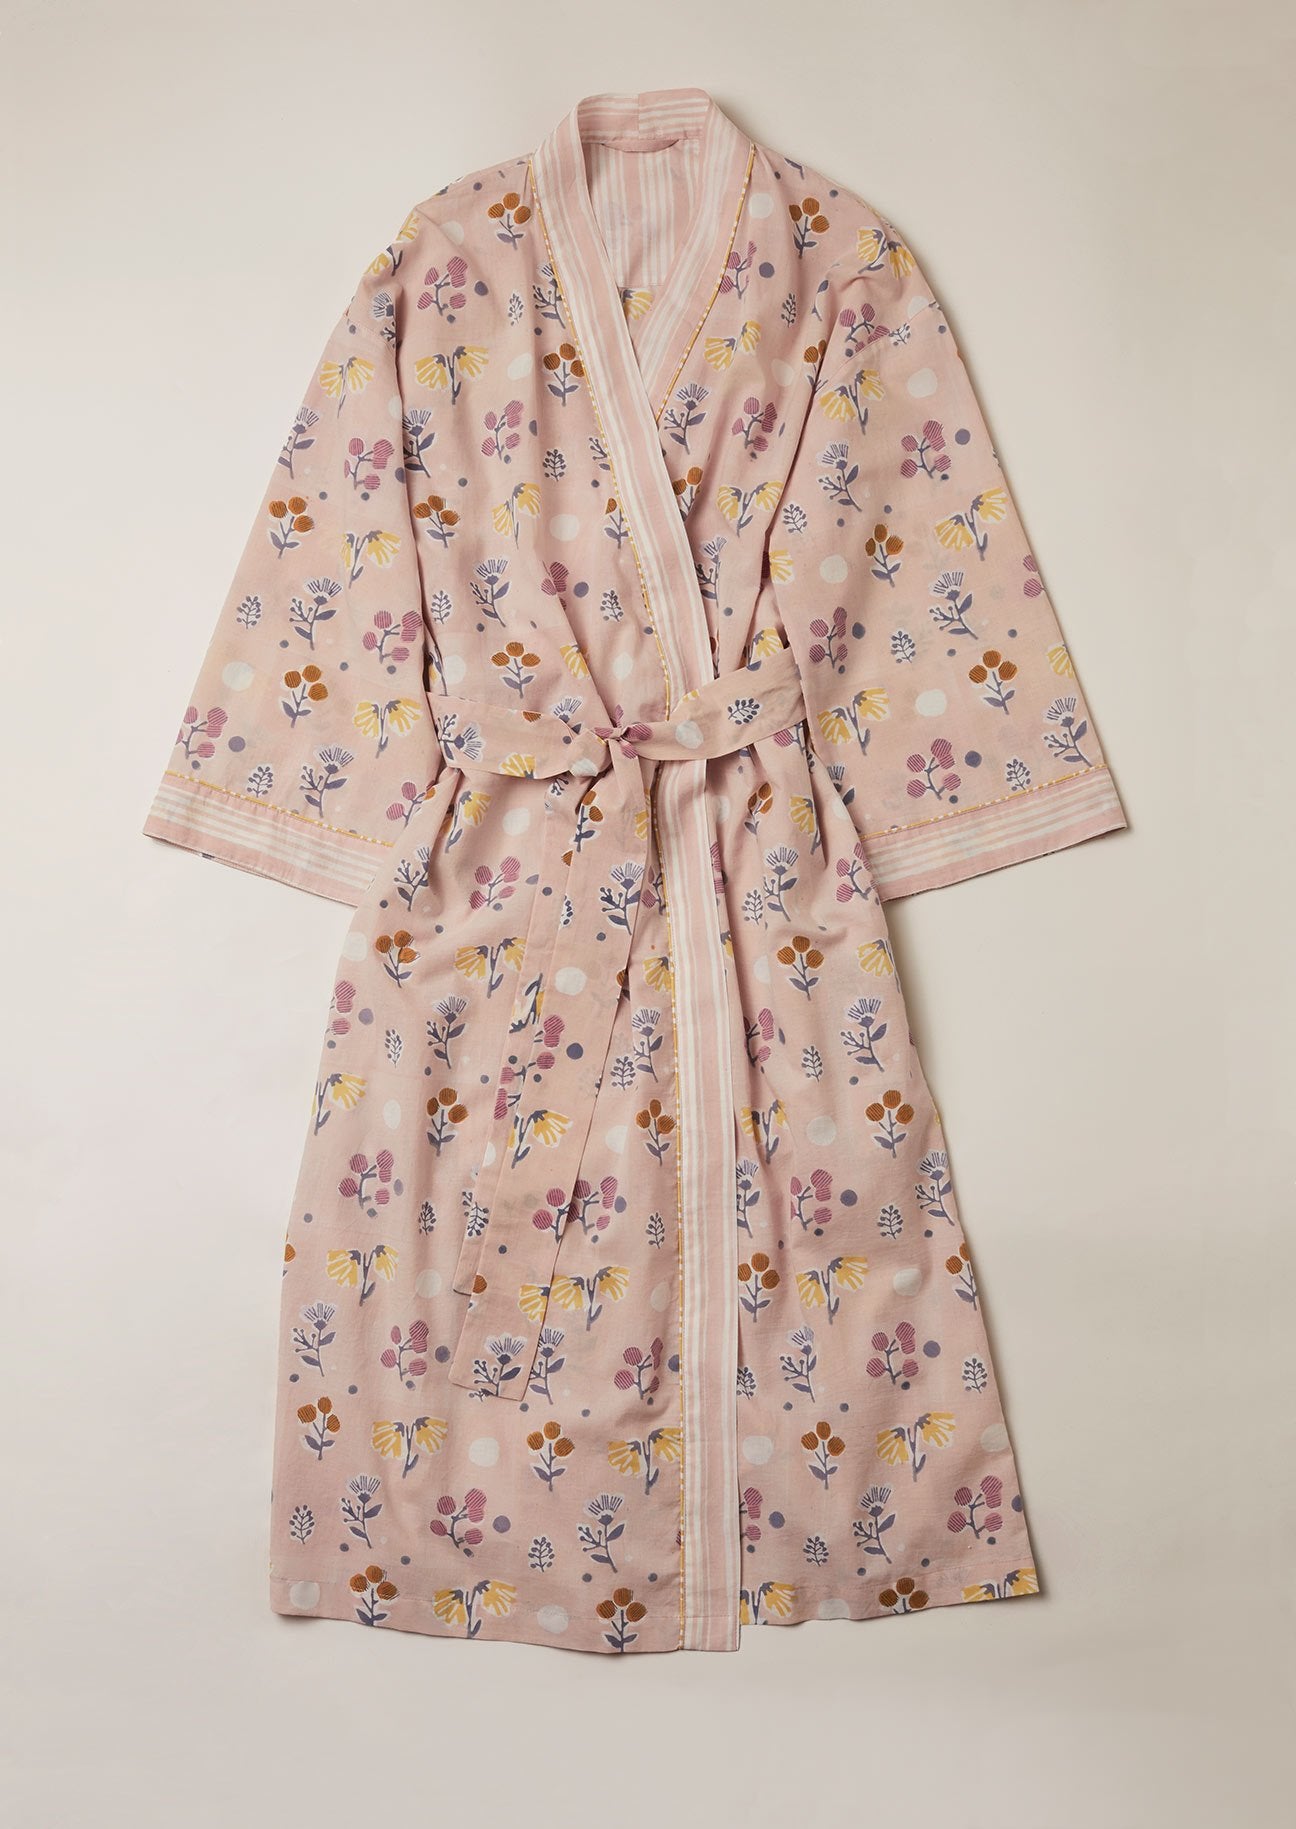 Dusty pink cotton kimono dressing gown block printed with mutli coloured flowers and a contrast pink stripe border.